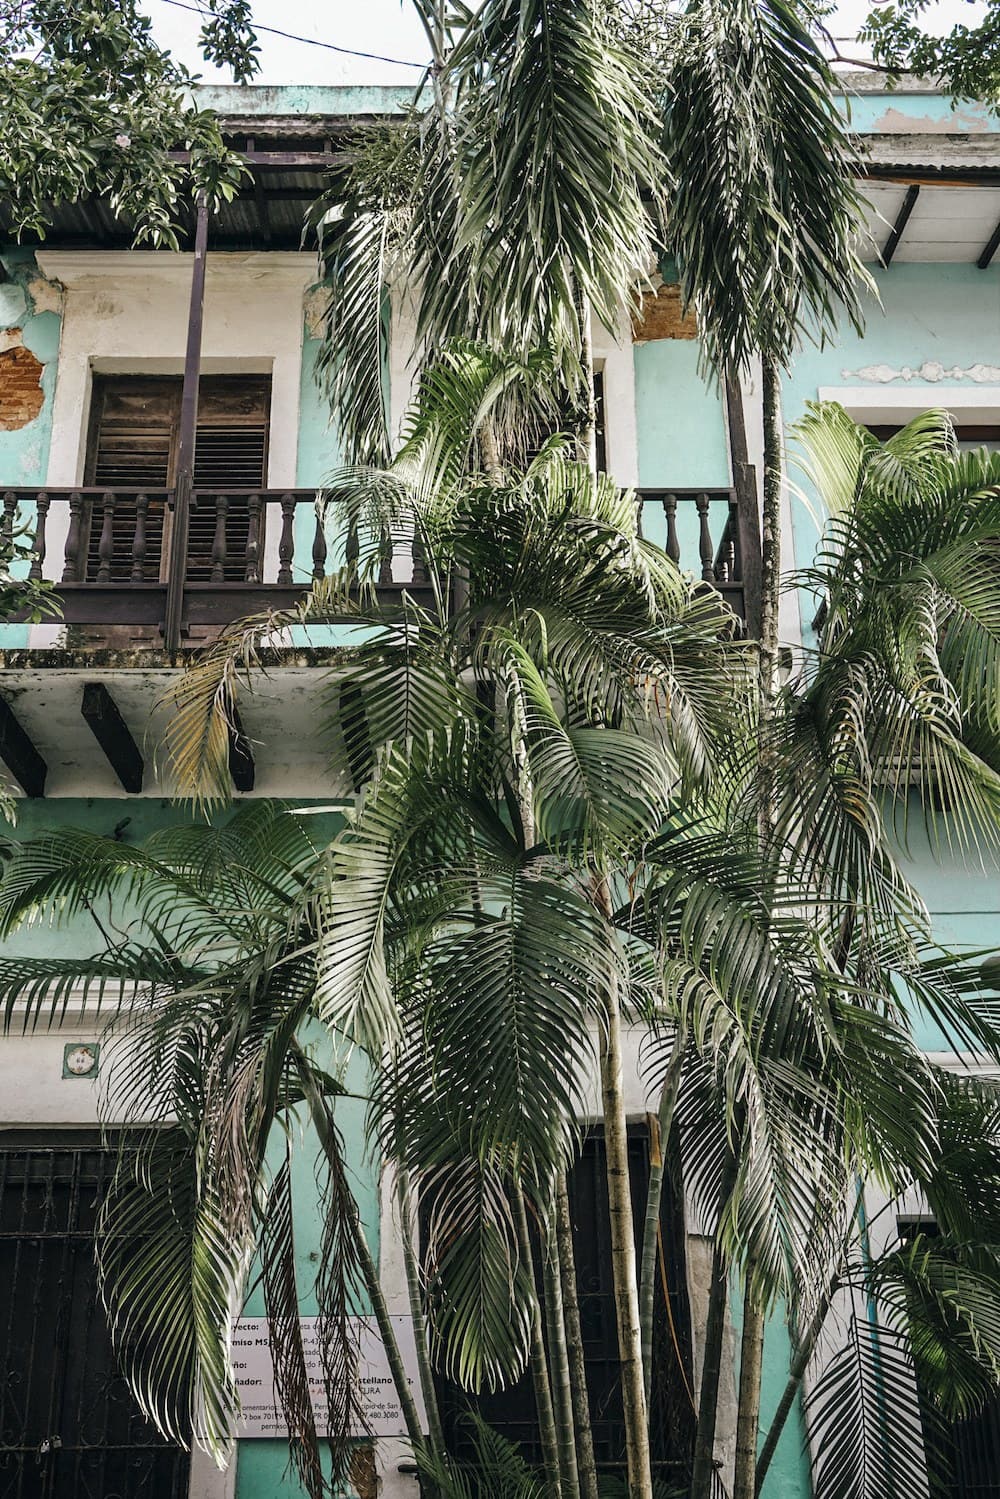 21 Photos to Inspire You to Visit Puerto Rico